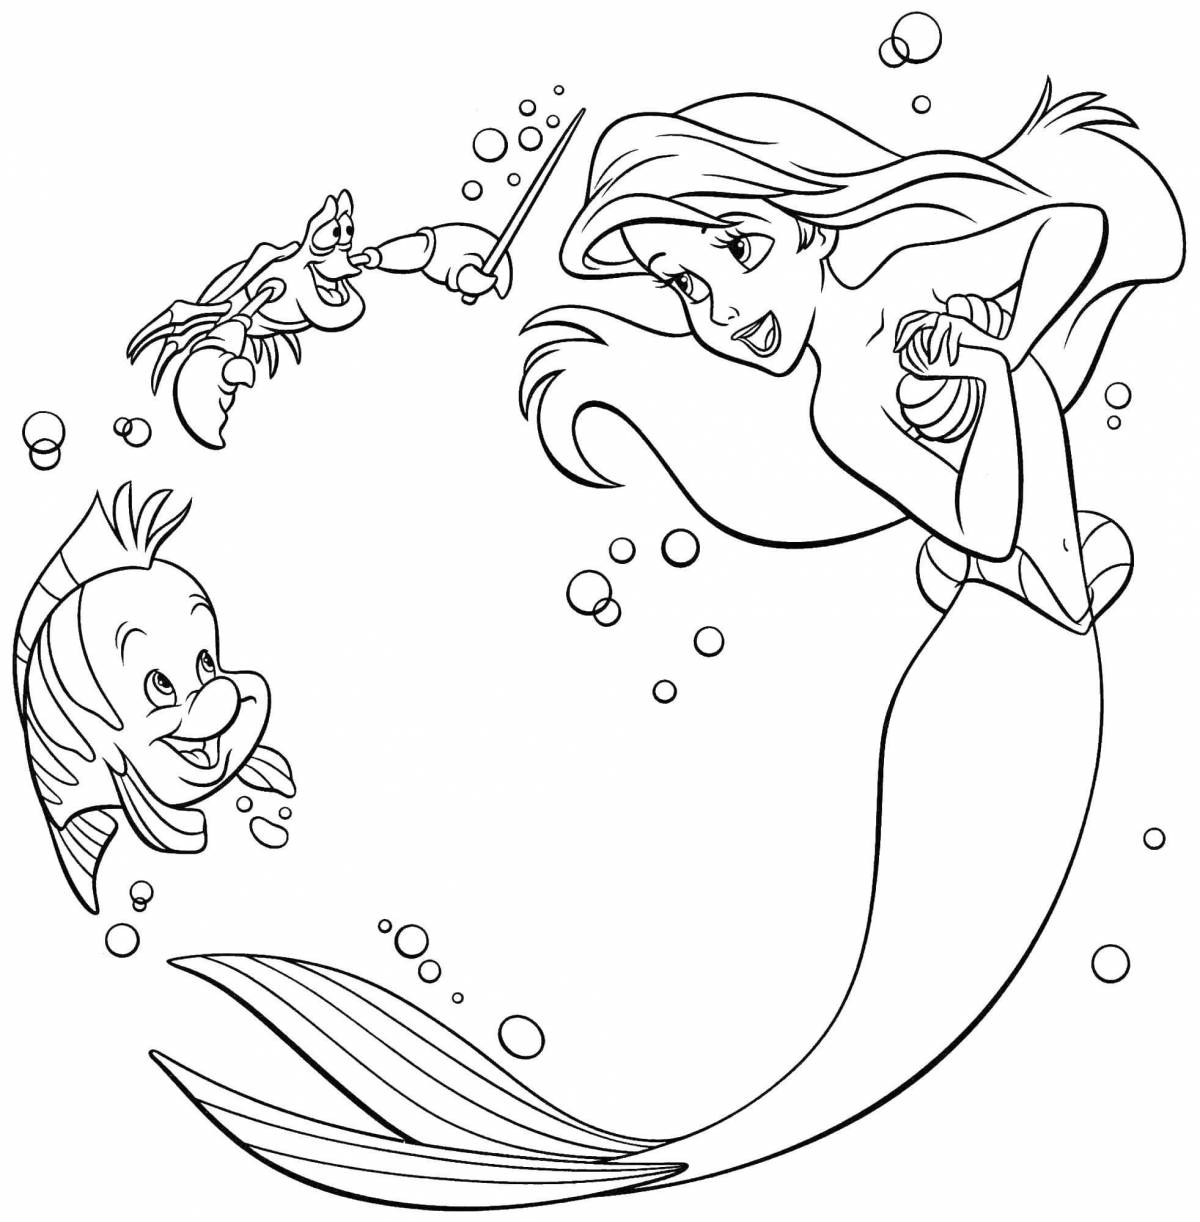 Grand coloring page русалка рапунцель